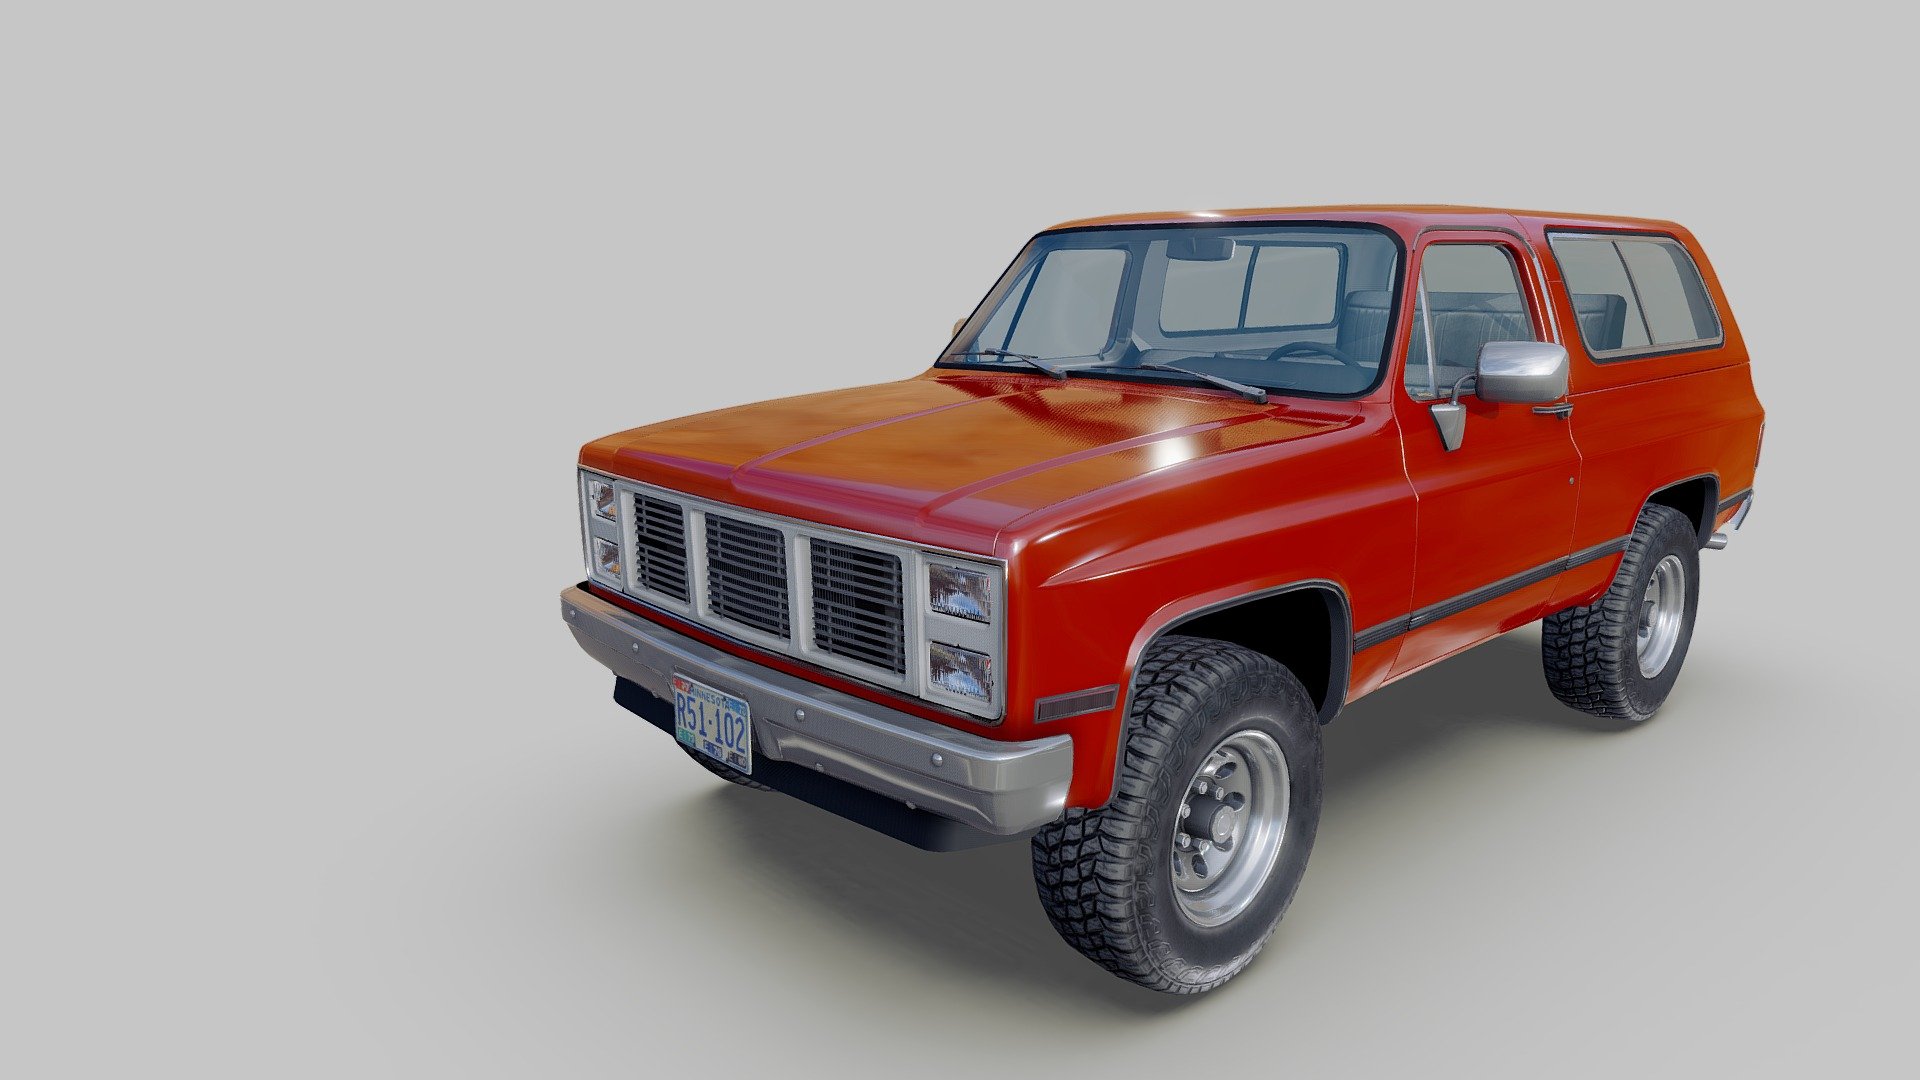 American offroad car model.

Midpoly exterior.

Lowpoly interior(1024x1024 diffuse texture).

Low poly wheels with PBR textures(2048x2048).

Original scale

Length - 4,3m, widht - 1,8m, hieght - 1,72m

Model ready for real-time apps, games, virtual reality and augmented reality.

Asset looks accuracy and realistic and become a good part of your project 3d model